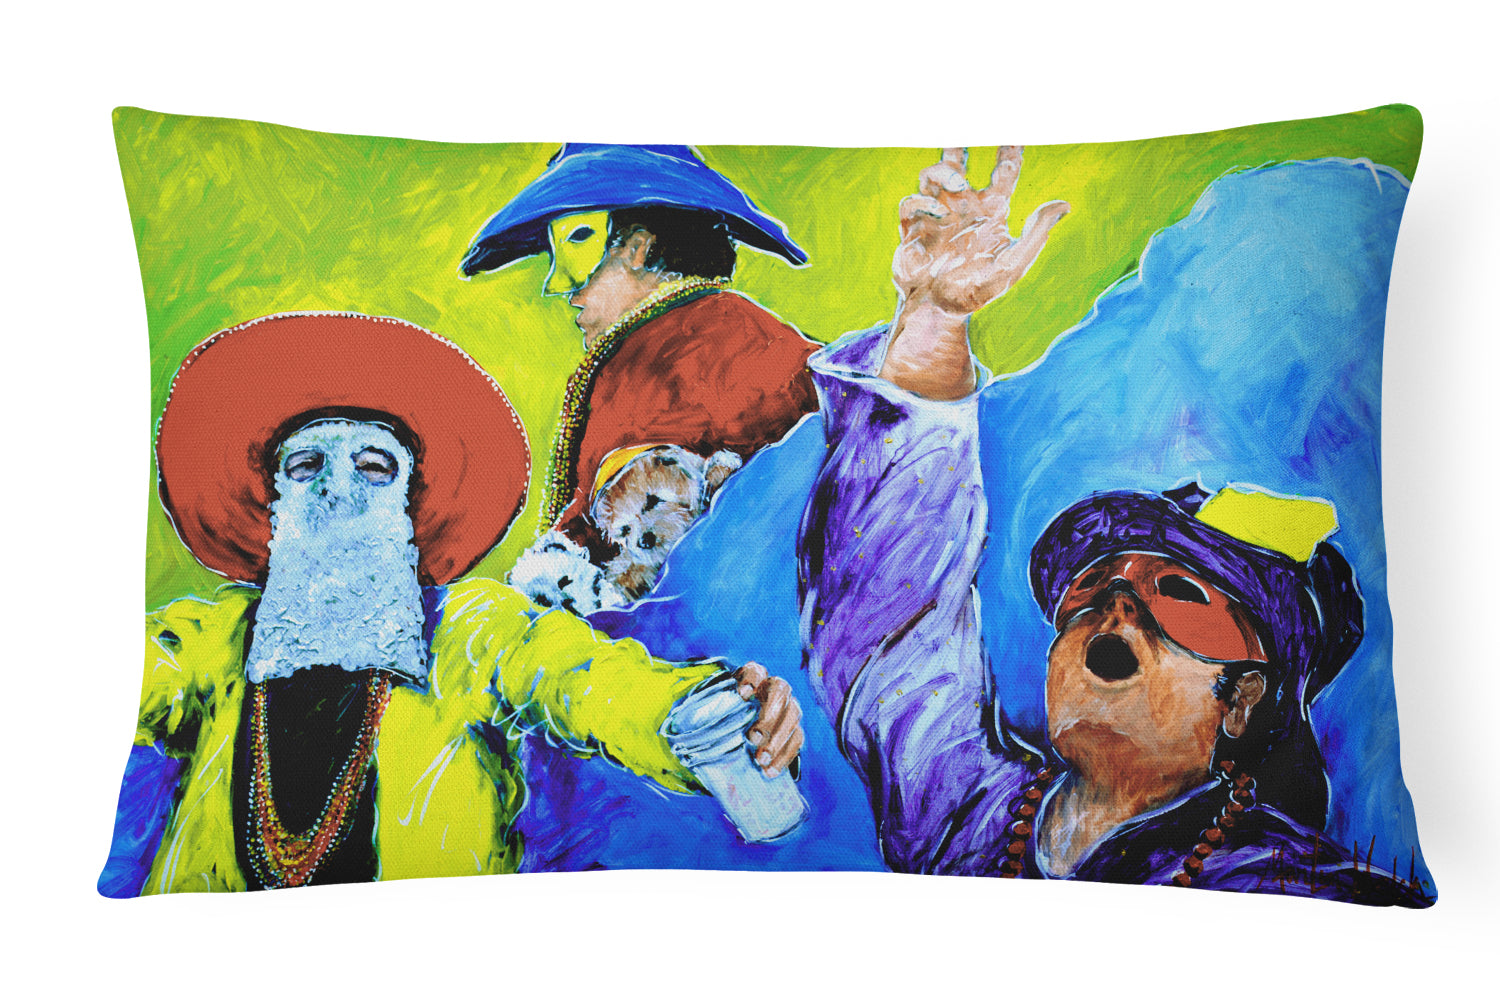 Buy this Mardi Gras Throw me something mister Canvas Fabric Decorative Pillow